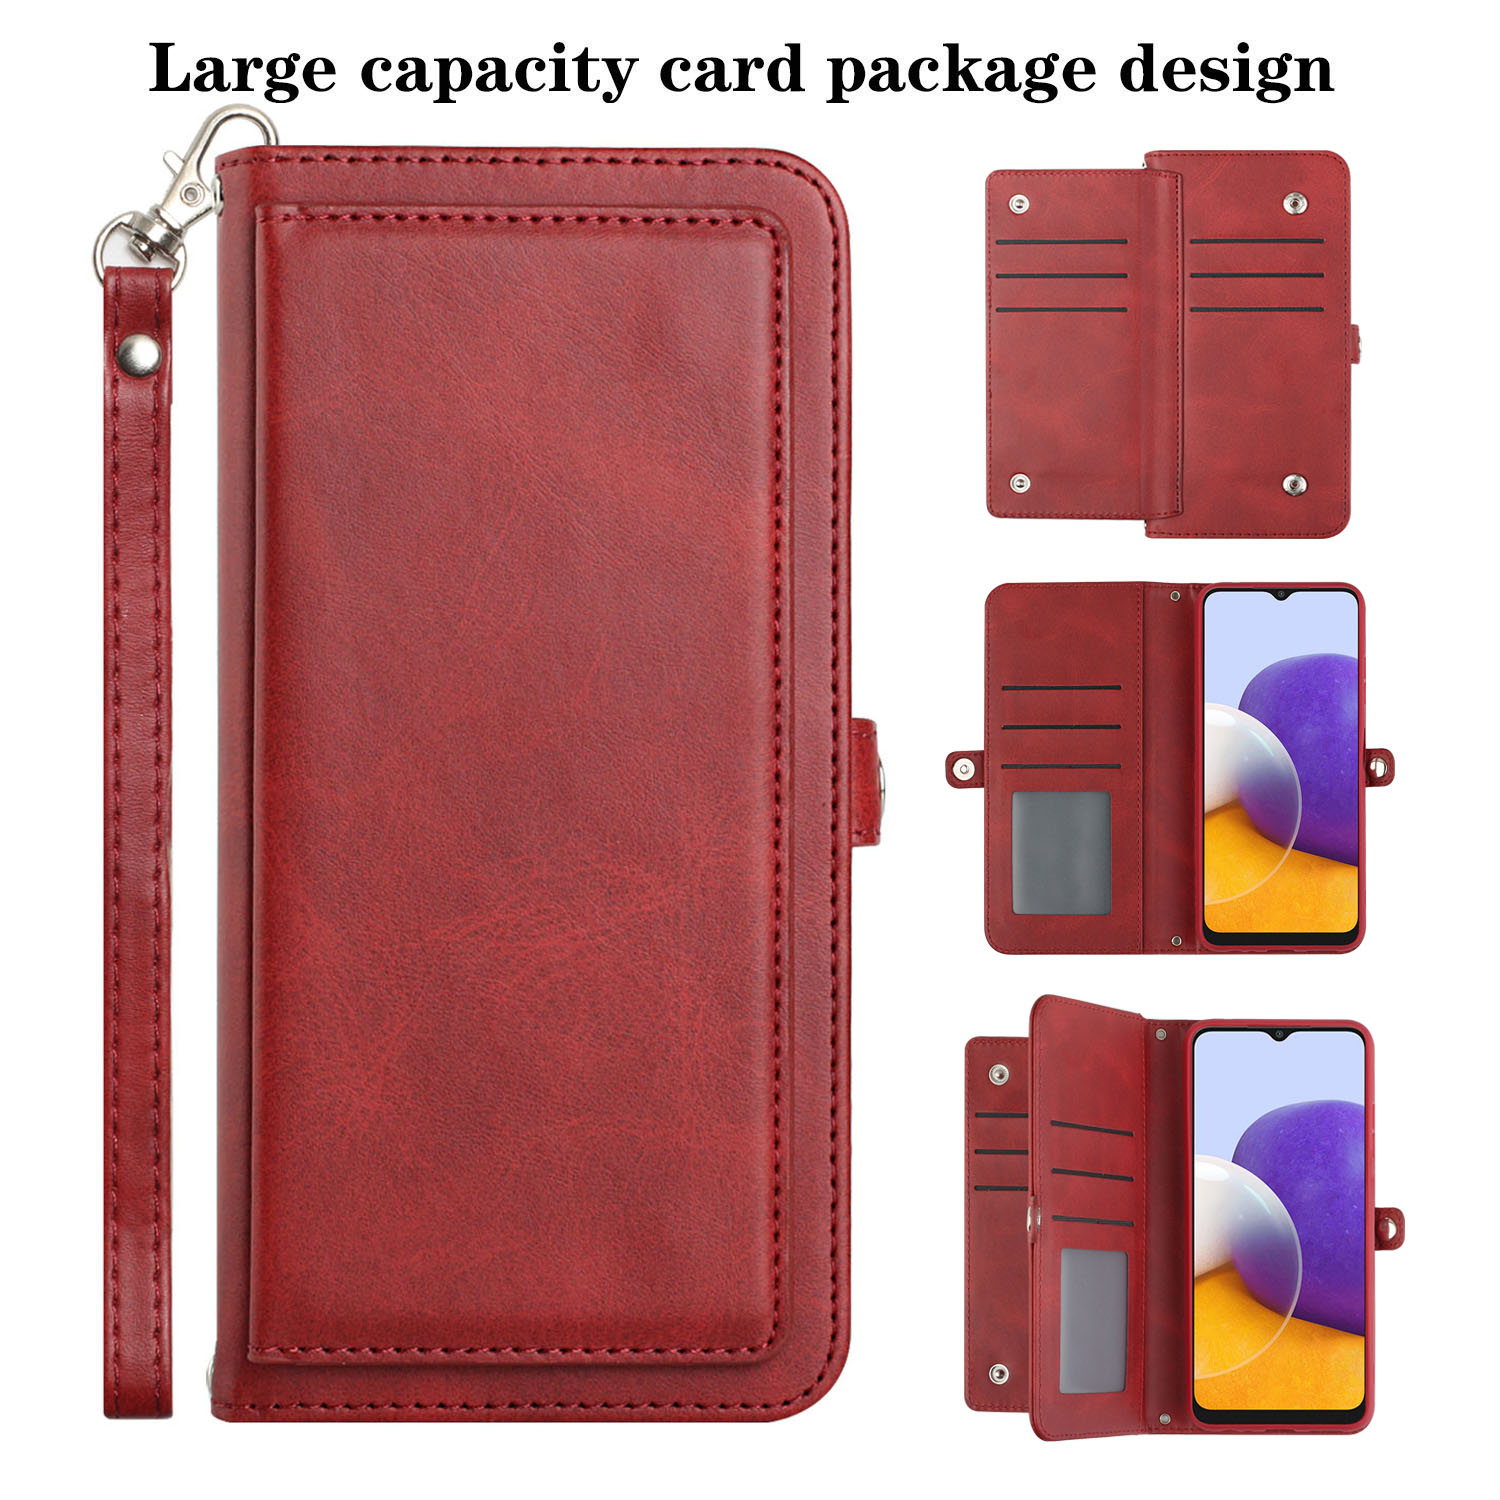 Premium PU Leather Folio WALLET Front Cover Case for Galaxy A22 4G (Red)